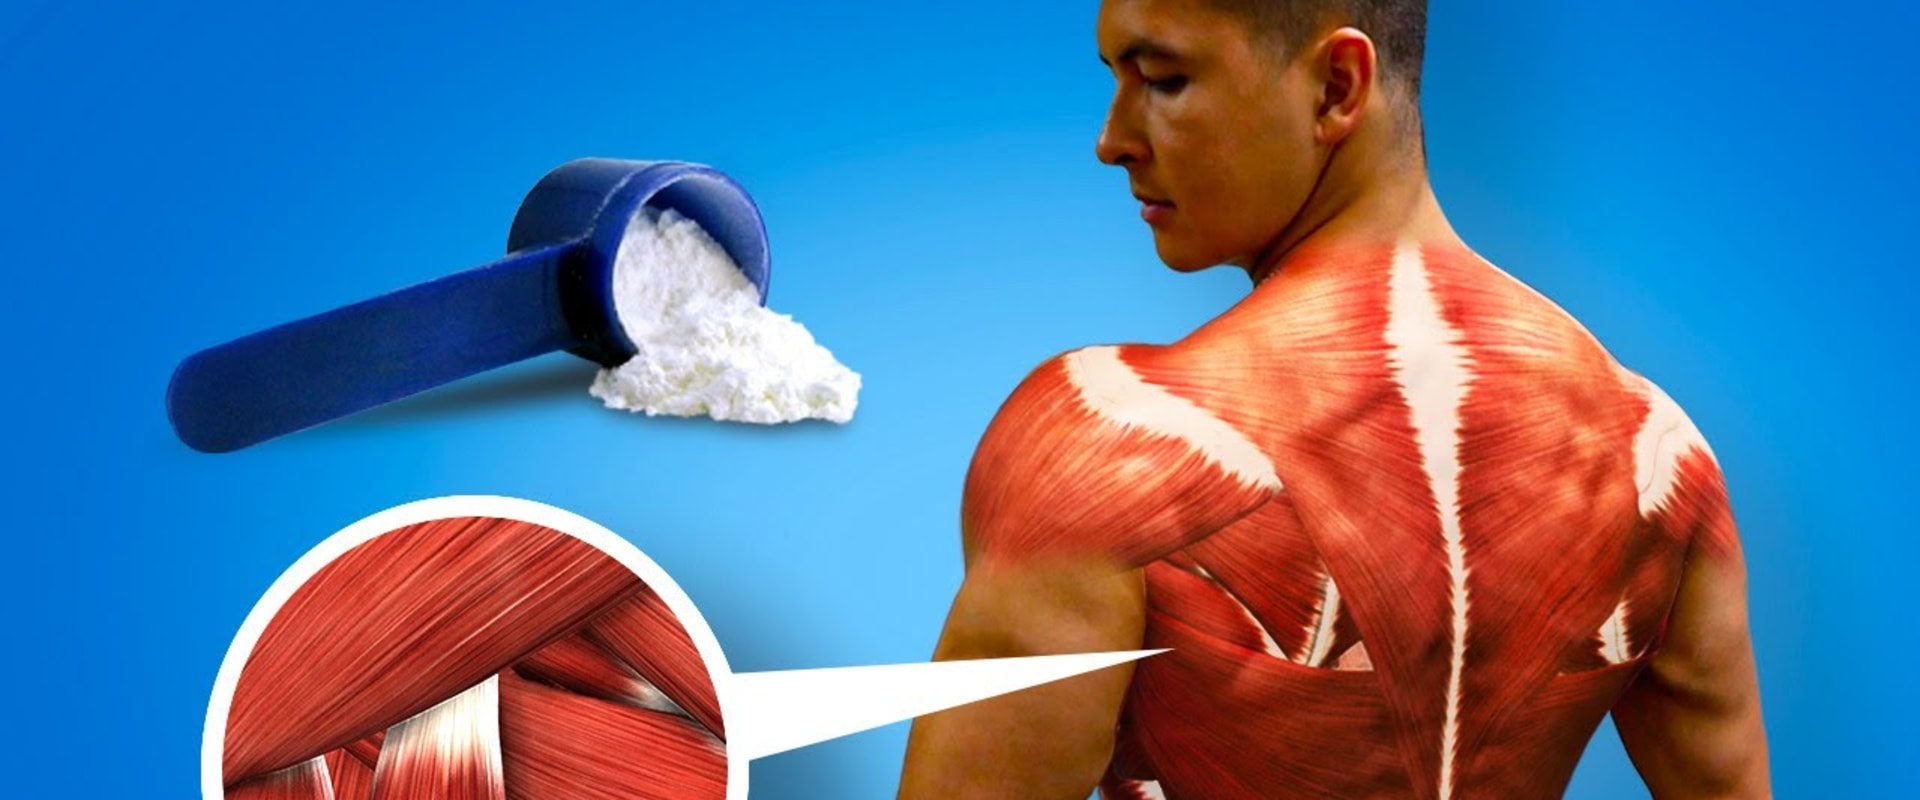 The Benefits and Uses of Creatine Supplements for Bodybuilding